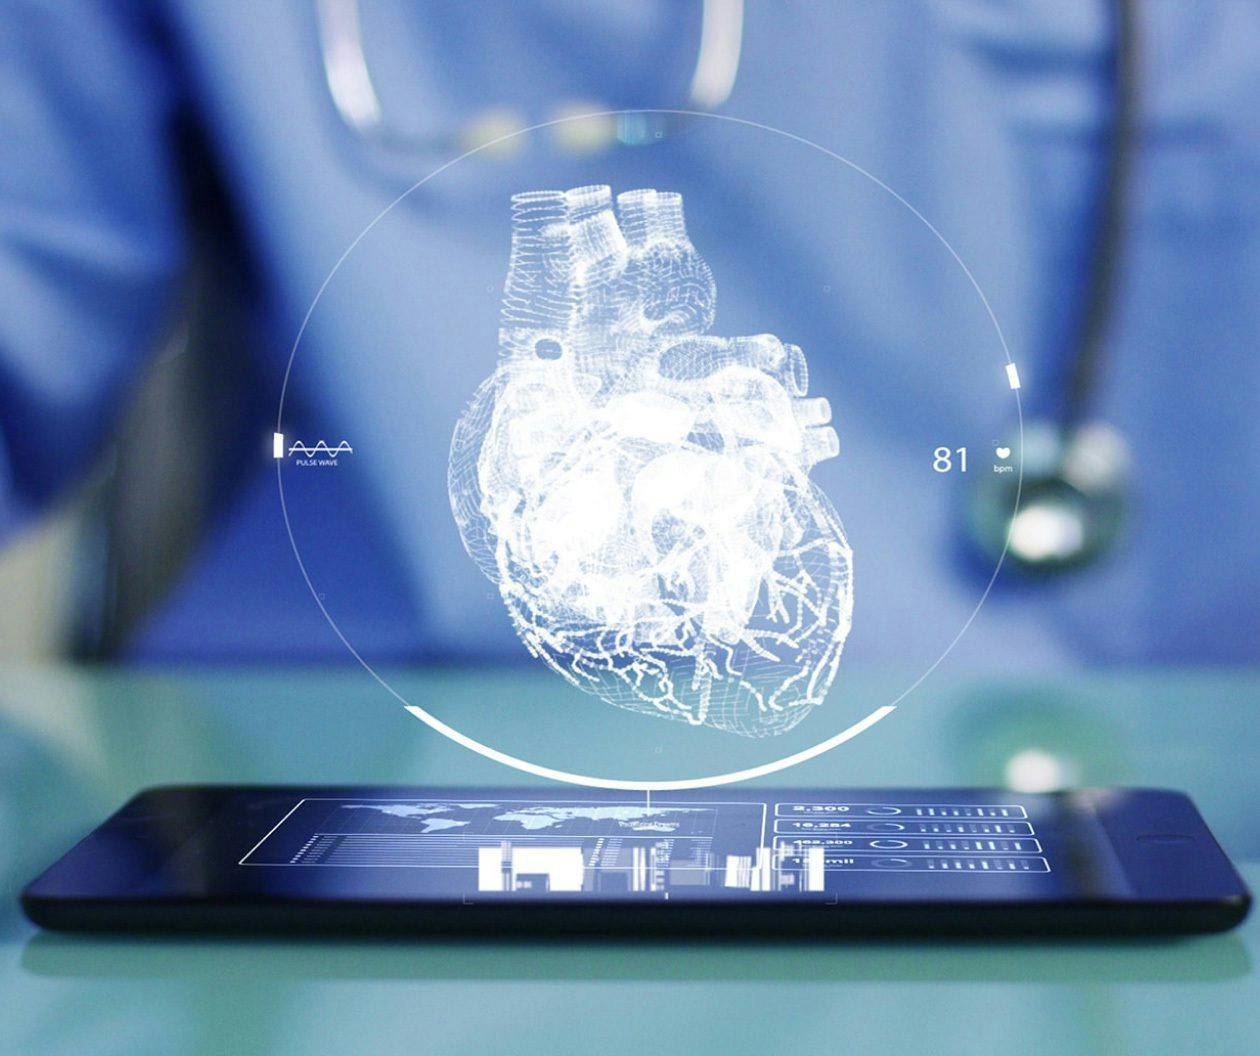 AI technologies for healthcare products